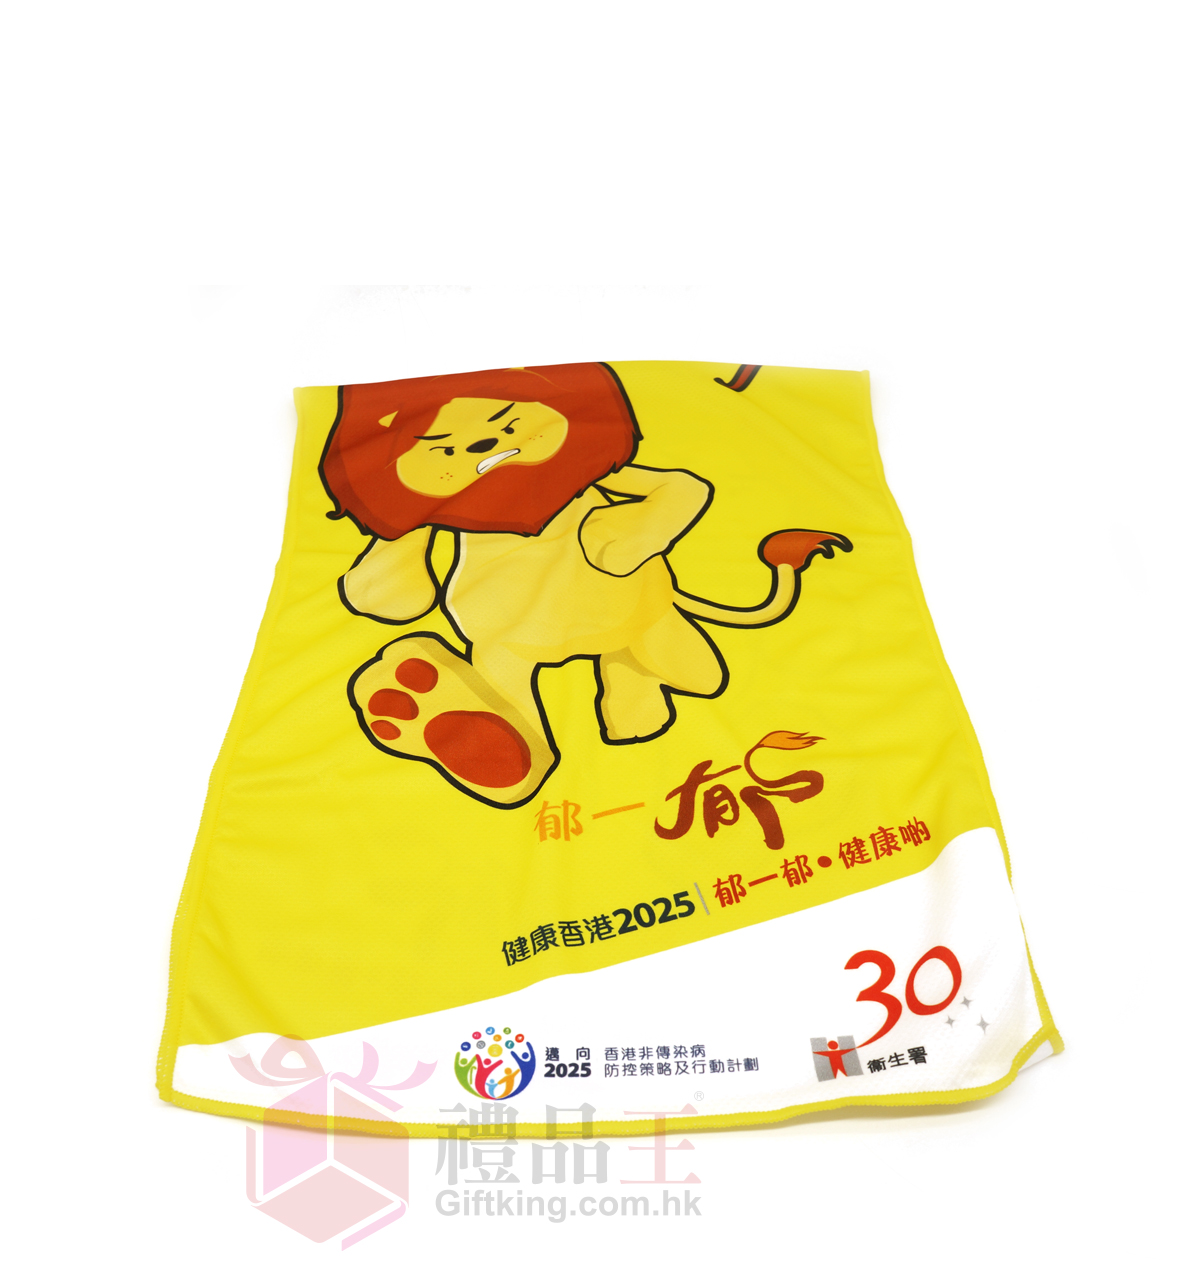 Department of Health towel (Sports gift)